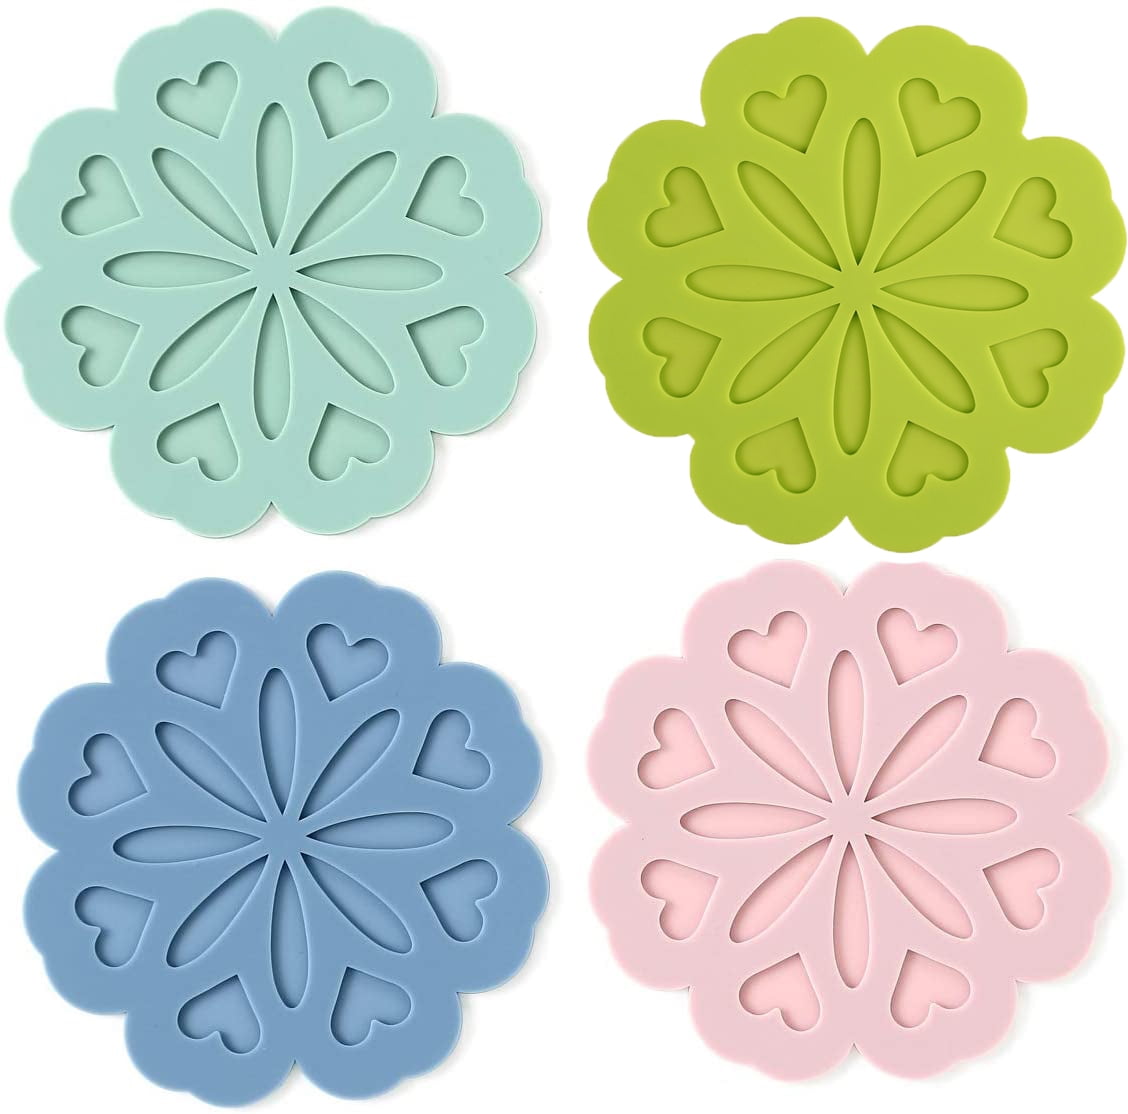 ,Trivet Mat,Place mats,Coasters,Insulation Mat for Hot Dishes/Pot/Bowl/Teapot/Hot Pot Holders,Non-slip,Durable Kitchen Tool 3 pack Silicone Pot Pads 